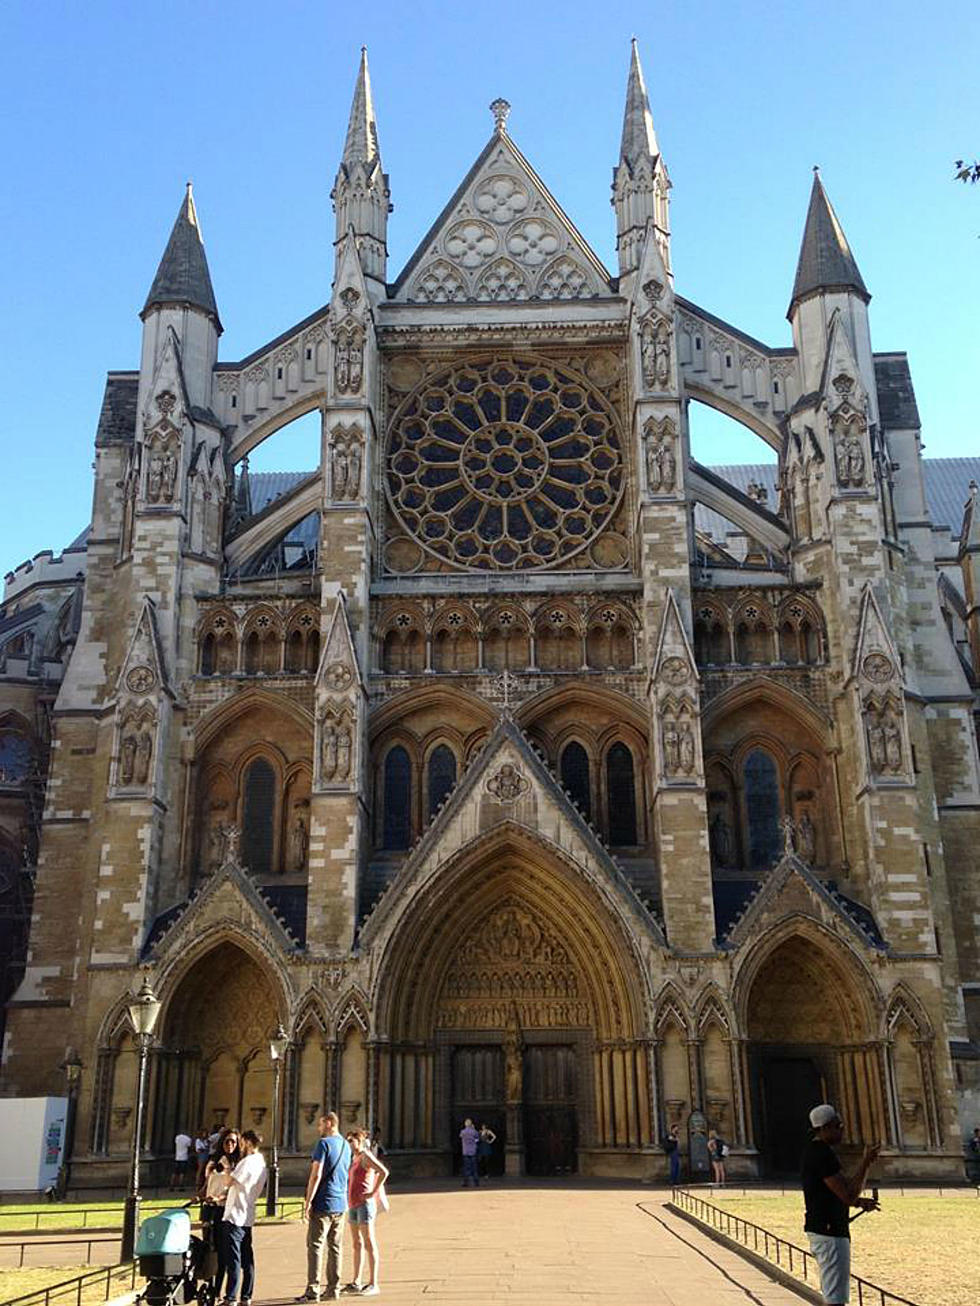 Wyoming's Zimmerman Family Enshrined at Westminster Abbey in London